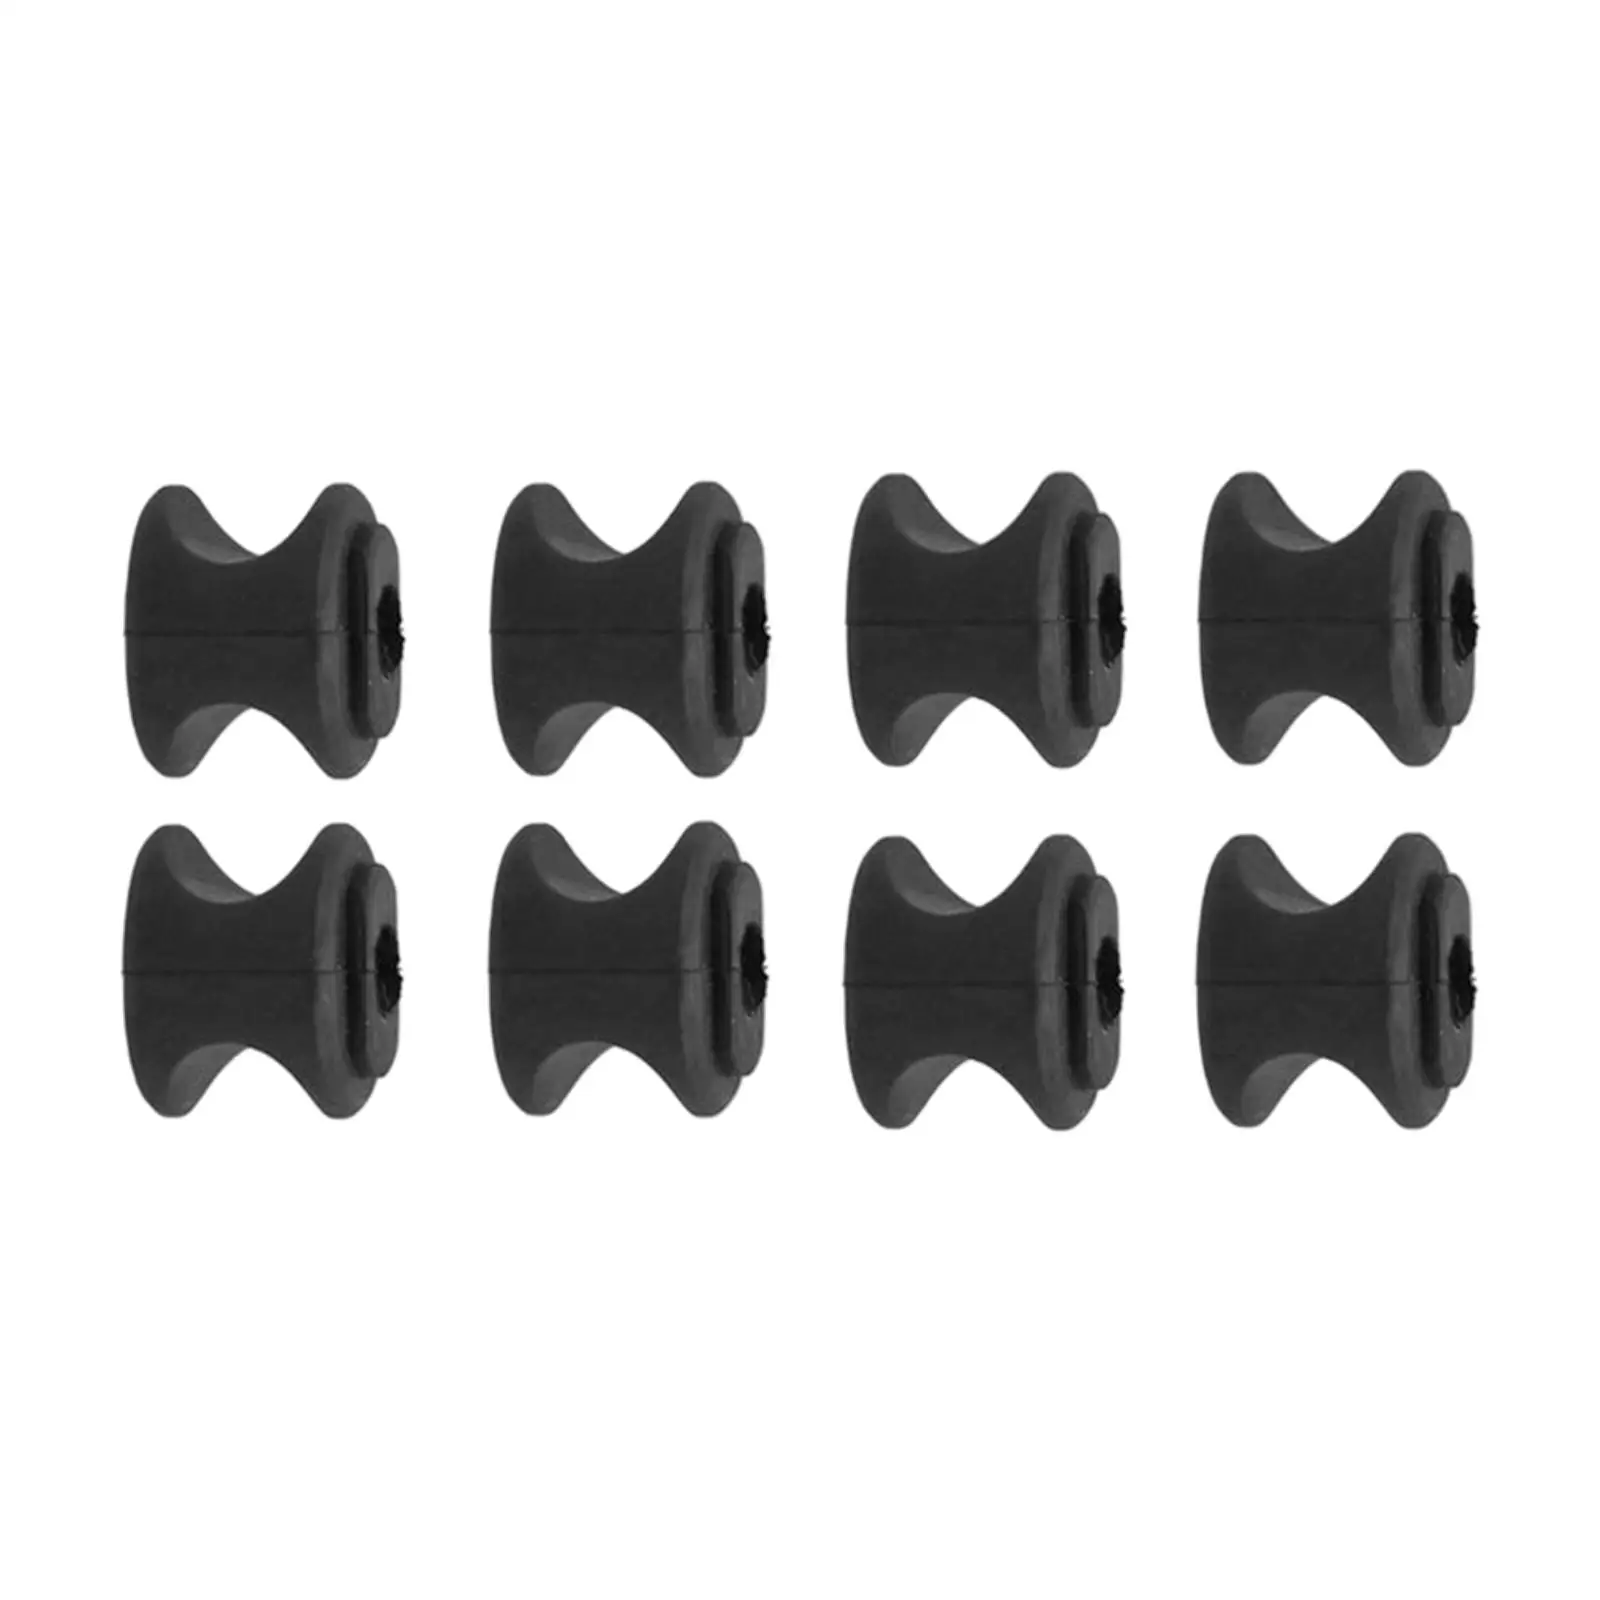 8x Rear Stabilizer Support Bushing Fit for W204 W212 W221 x204 Accessories